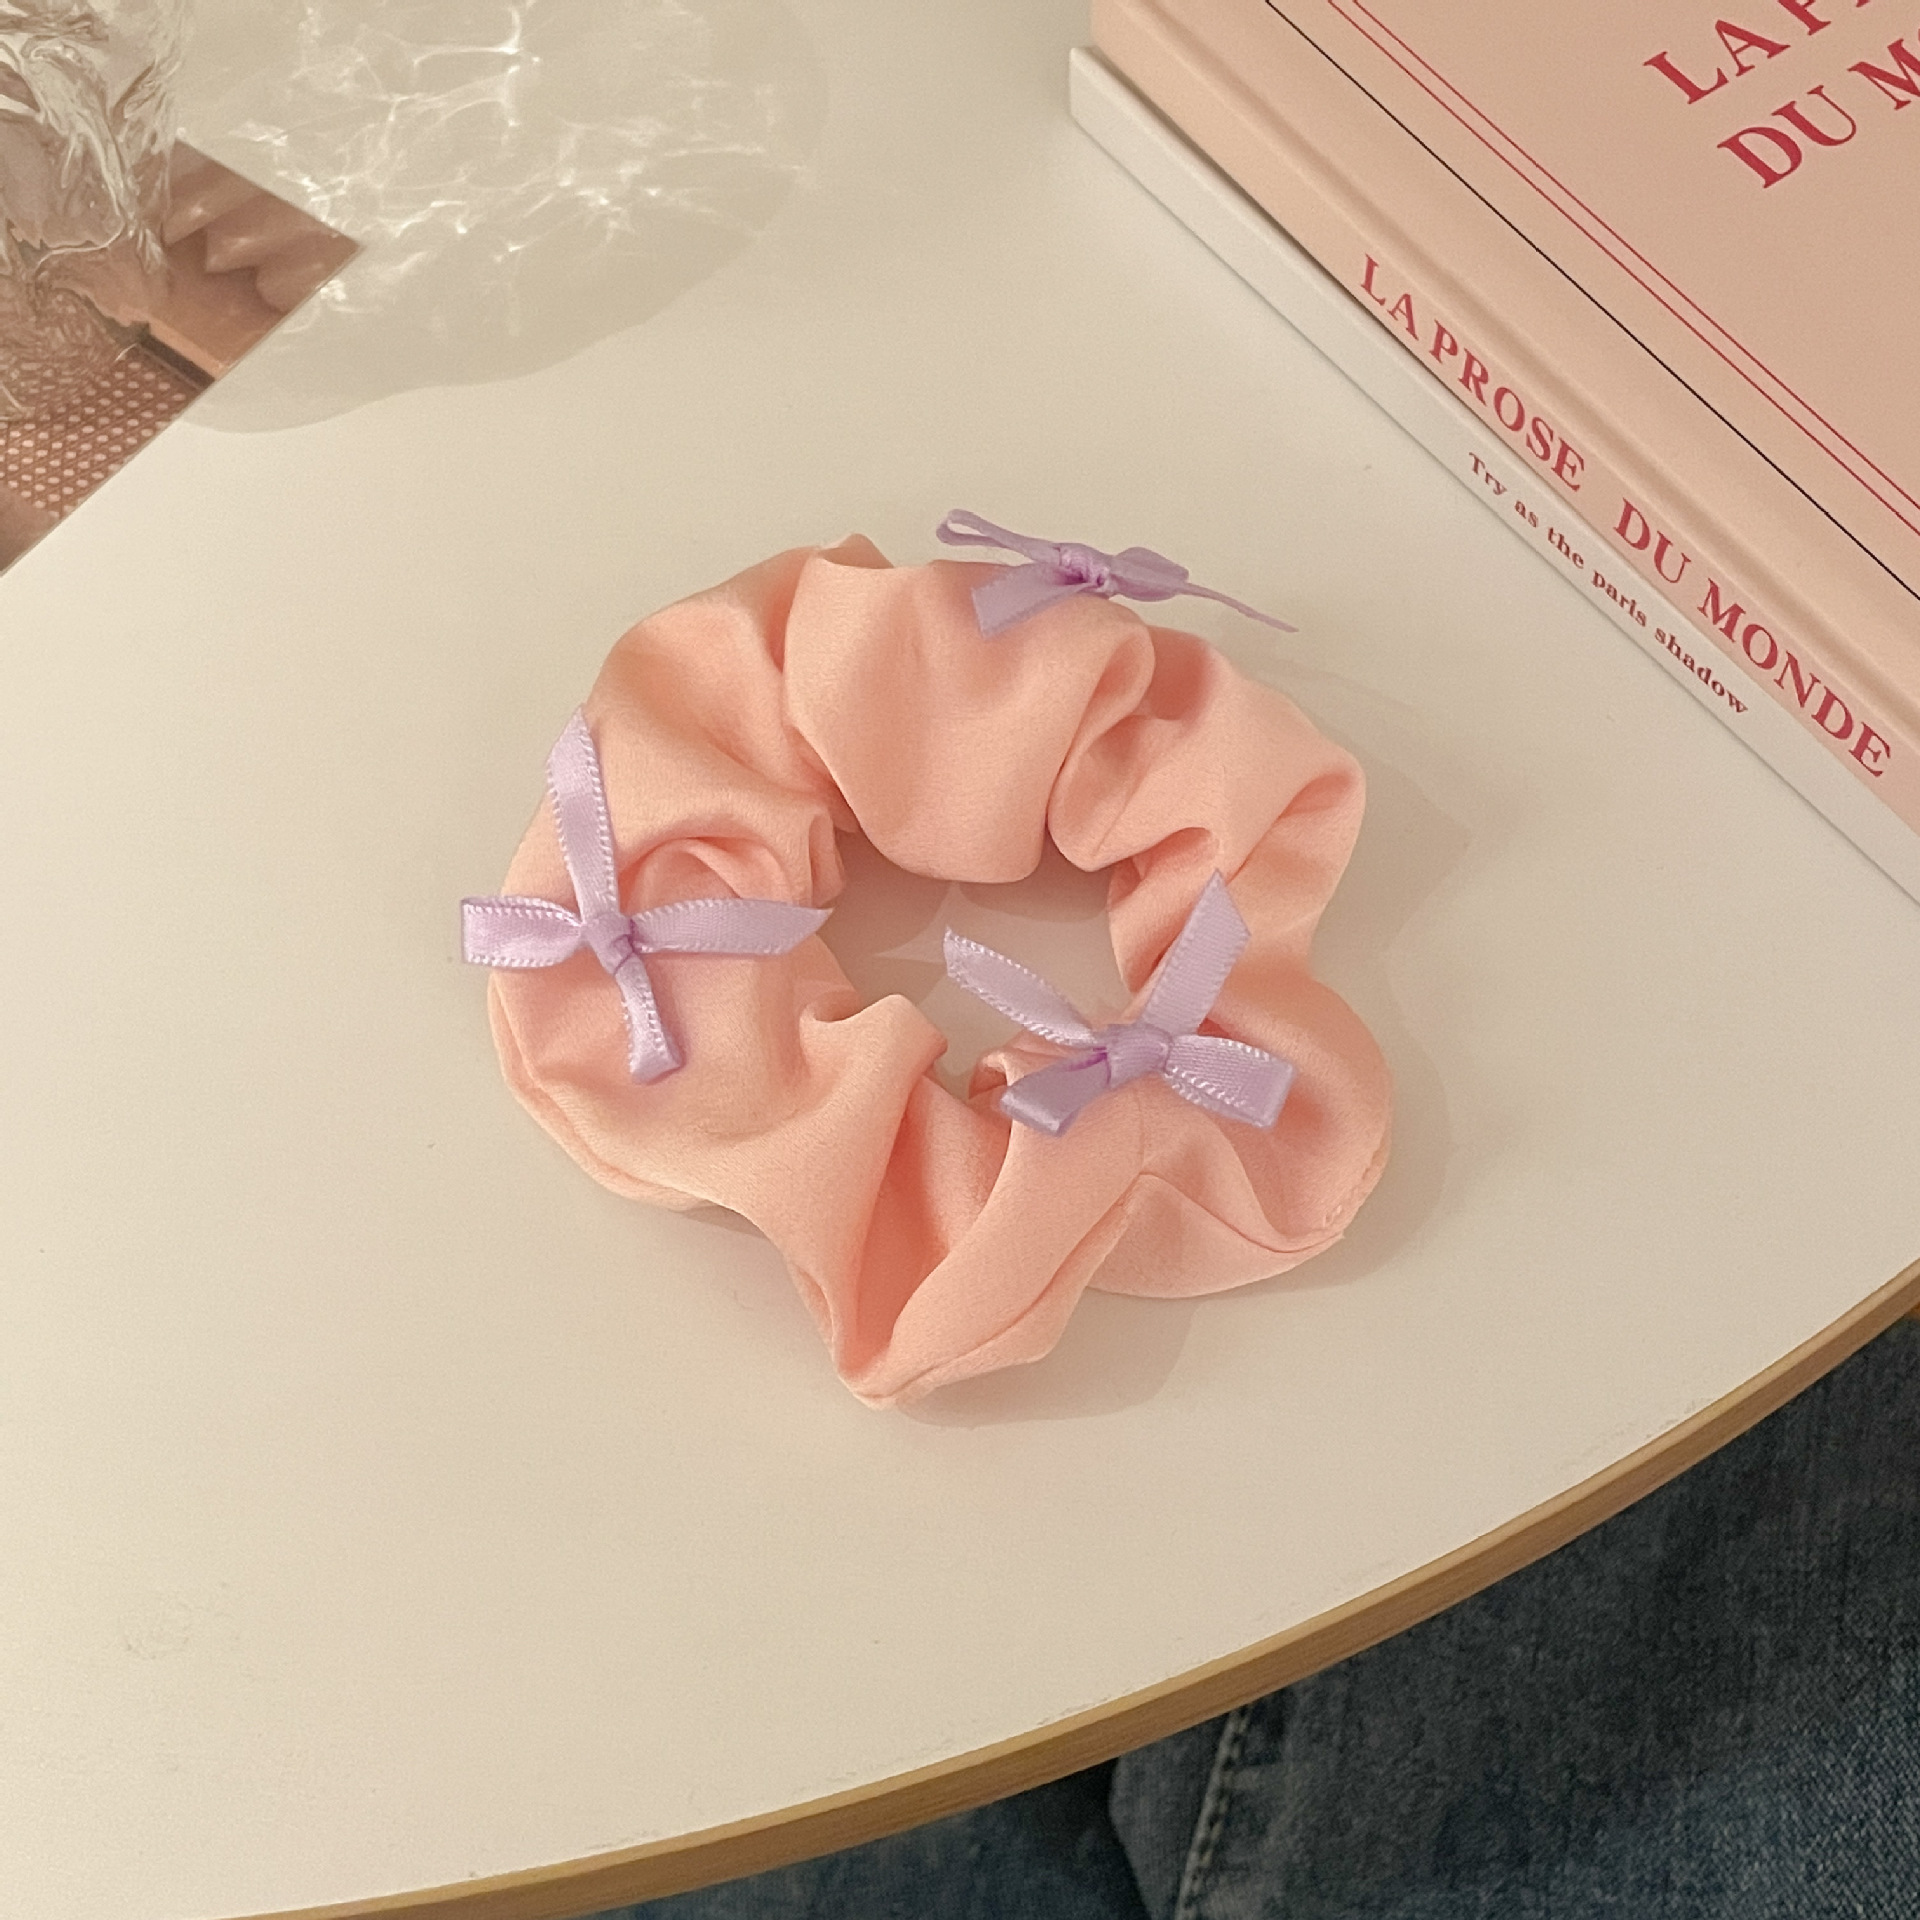 Sweet Korean Style Bowknot Hair Ring Elegant Black and White Color Pleated Fabric Super Fairy Satin Large Intestine Hair Ring Hair Accessories